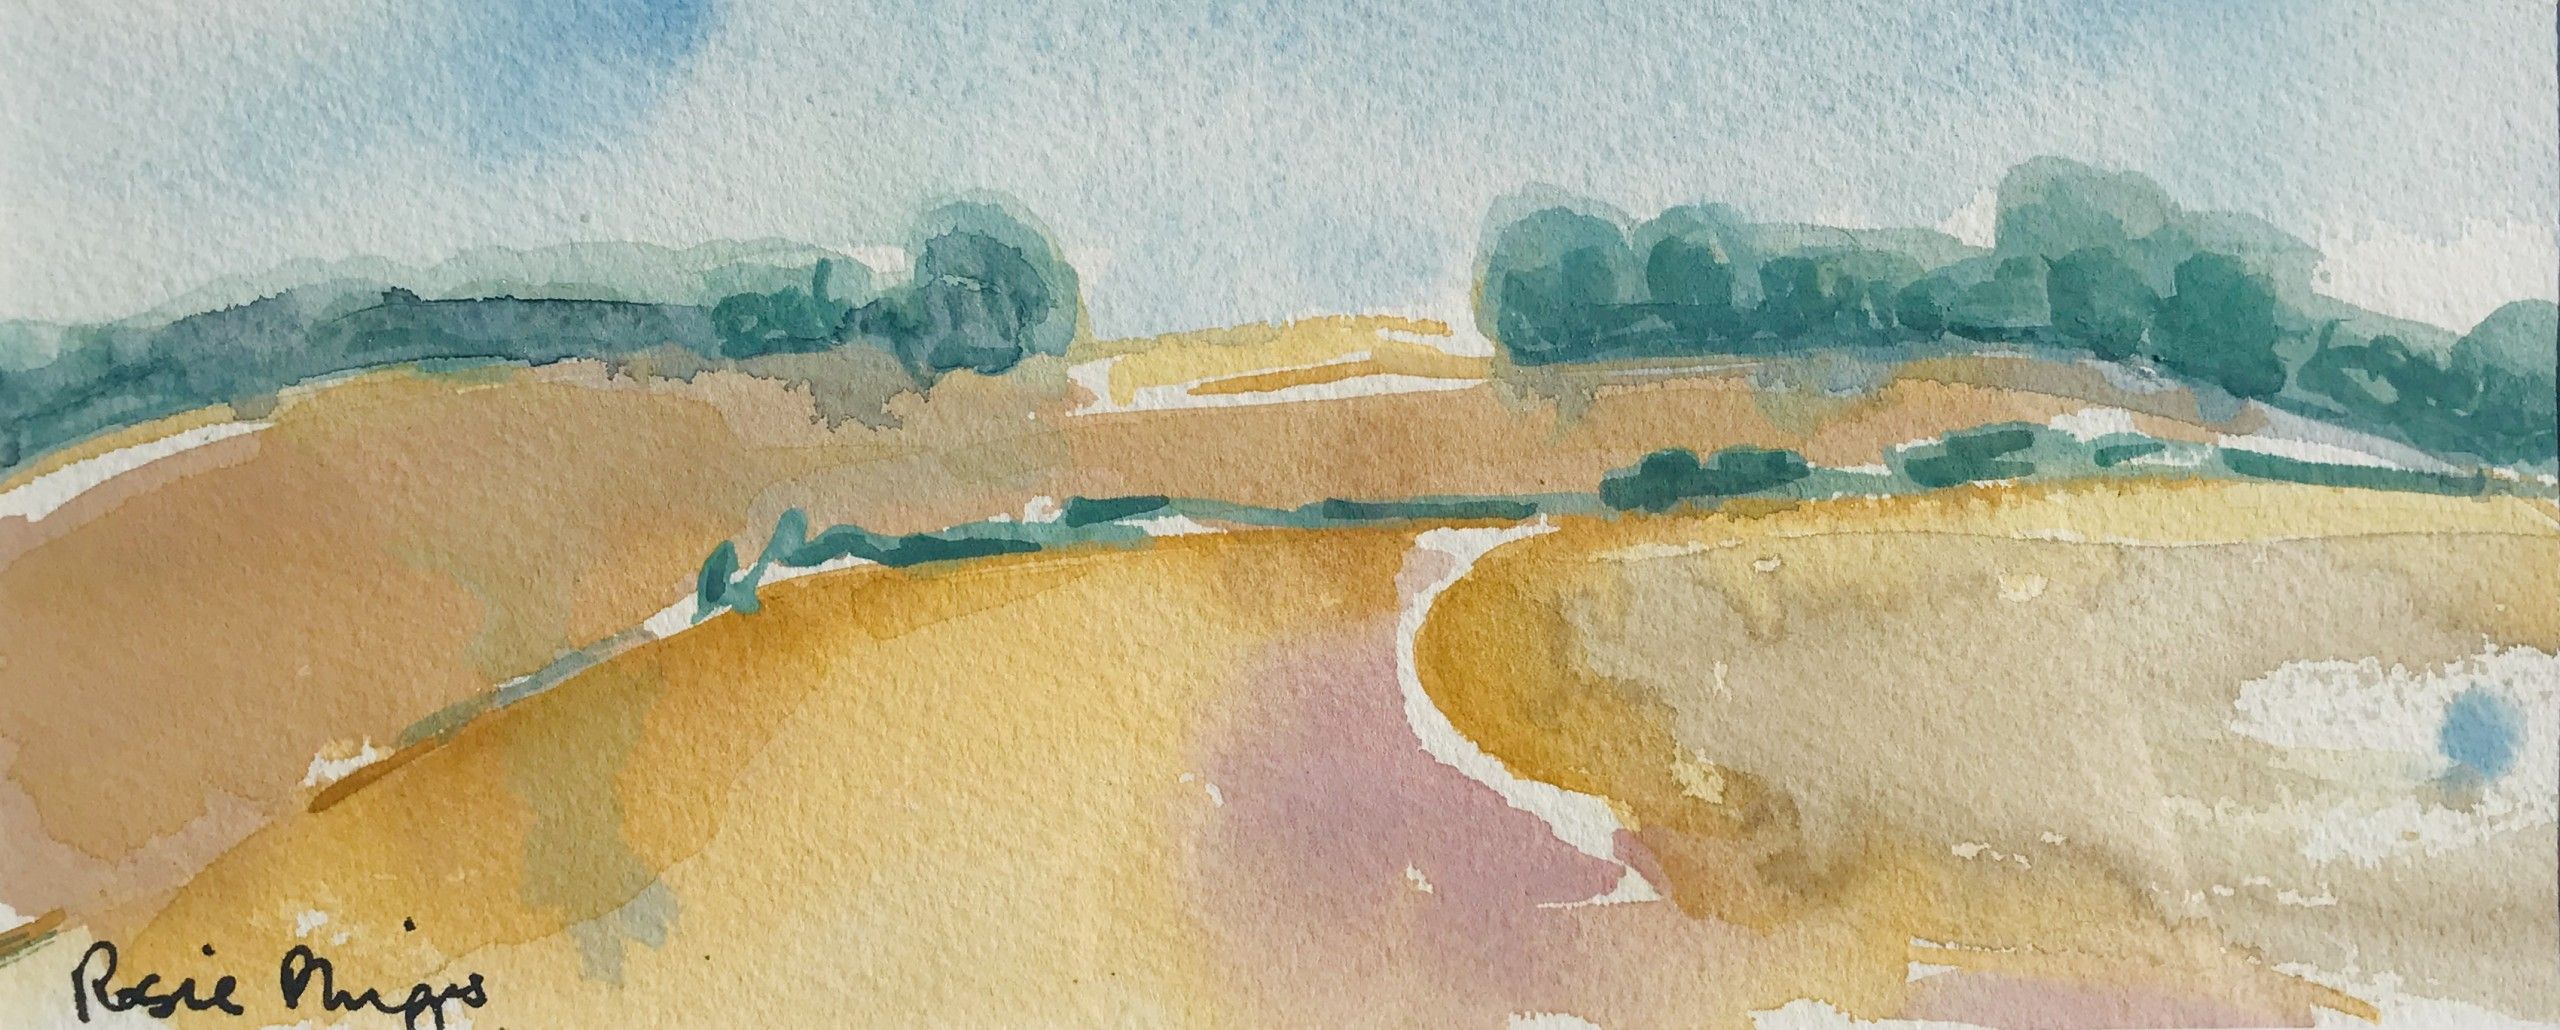 Cotswolds Landscape VIII by Rosie Phipps